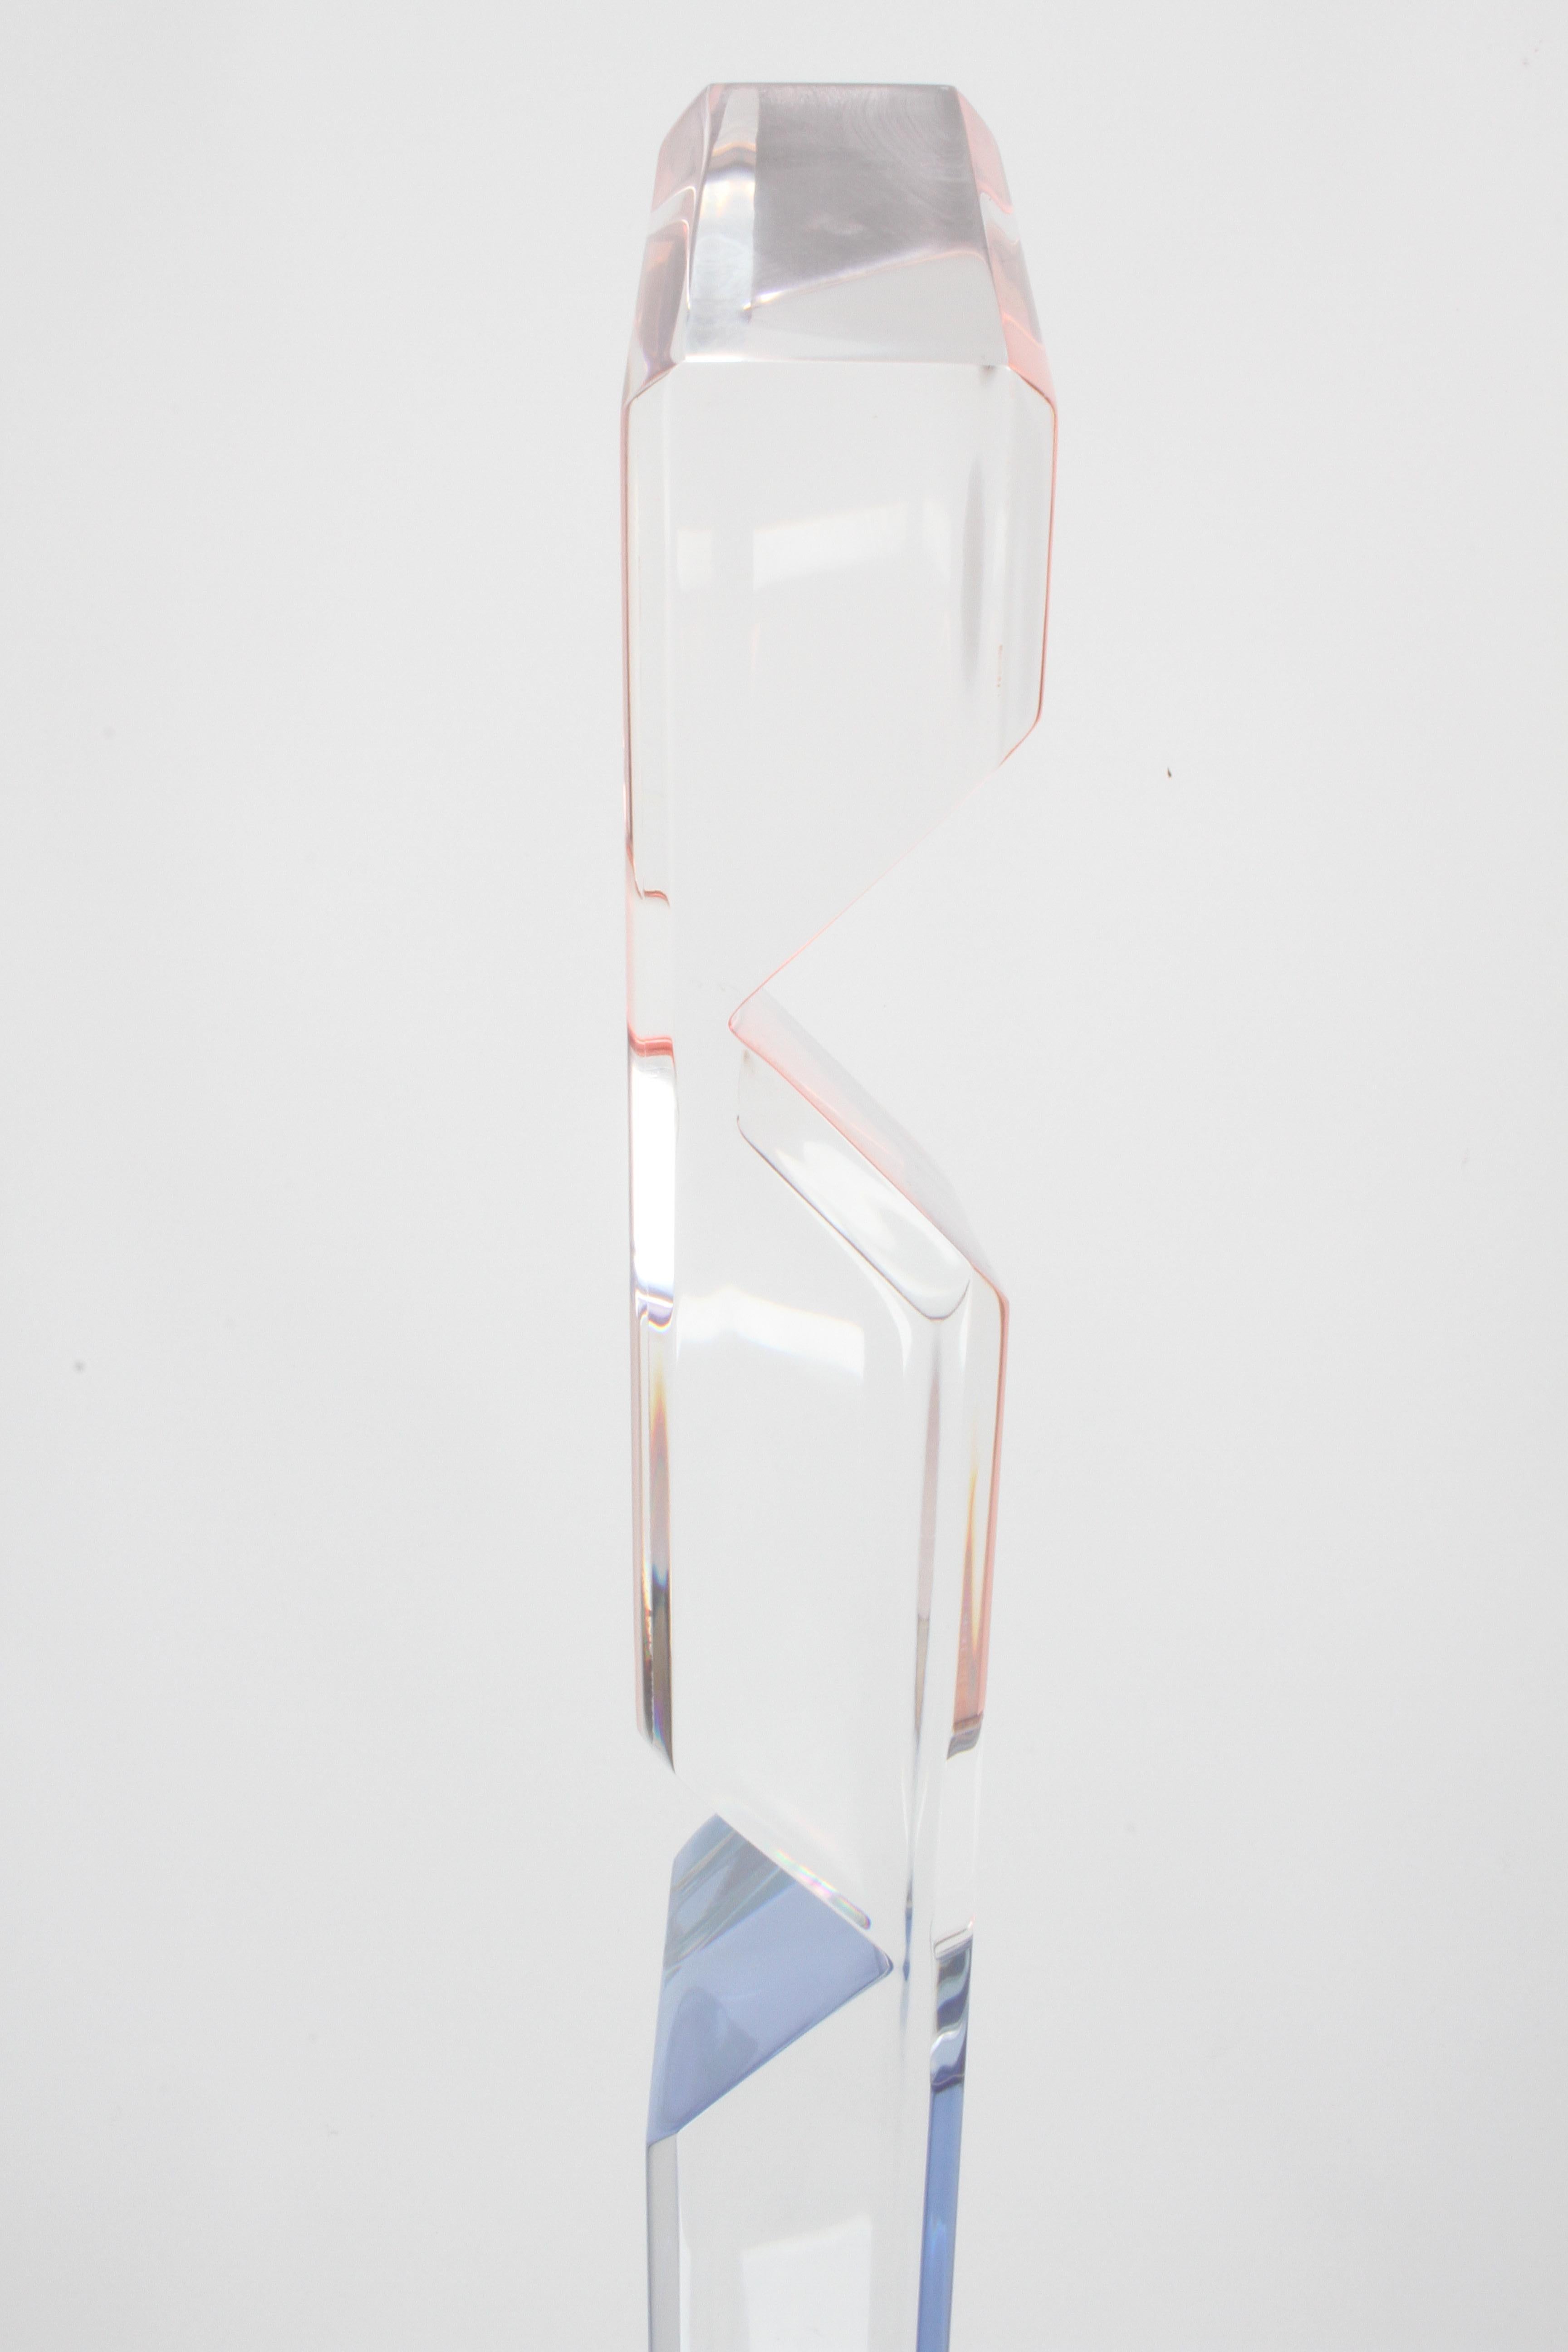 Unusually Tall Shlomi Haziza Signed Op-Art Colored Lucite TOTEM Form Sculpture 3